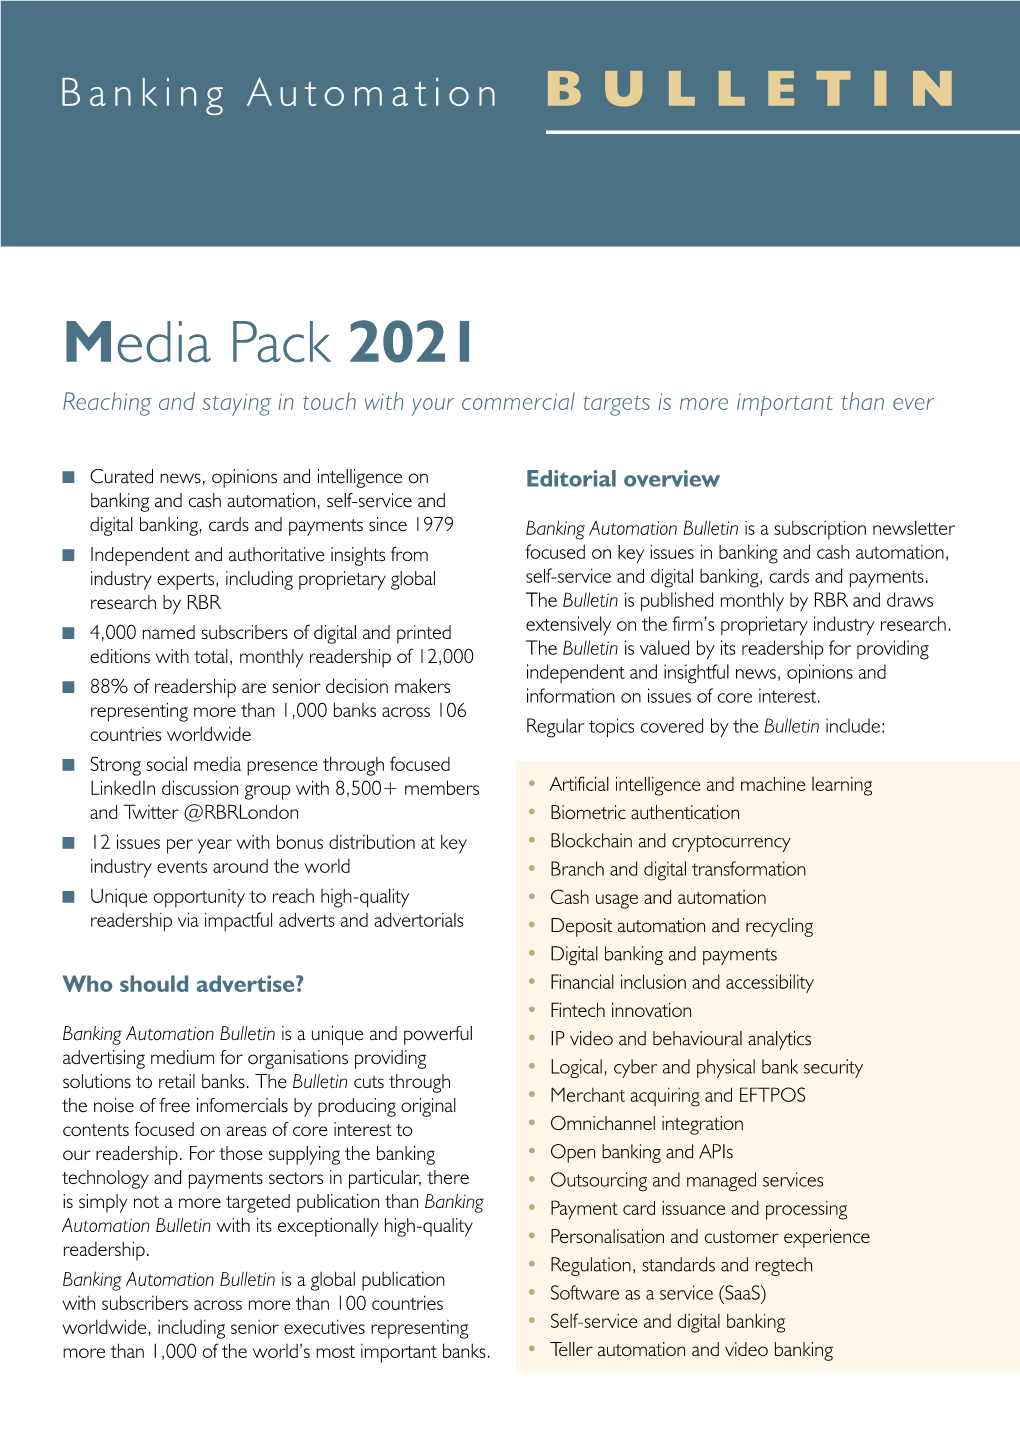 Banking Automation Bulletin | Media Pack 2021